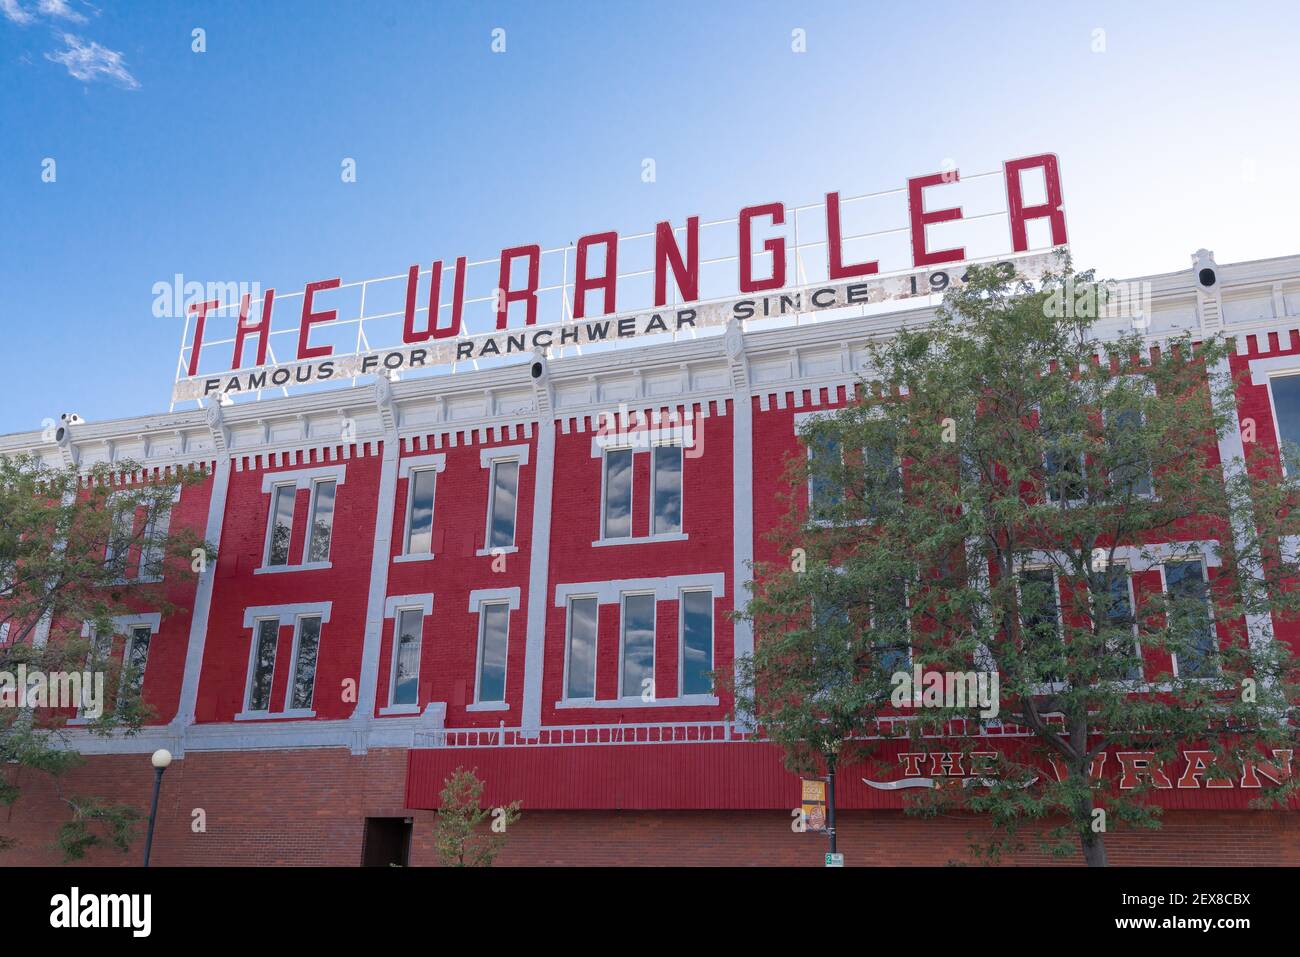 CHEYENNE, Wyoming - APRIL 27, 2018: Sign on top of The Wrangler in historic  downtown Cheyenne Wyoming. The three story red-painted brick building domi  Stock Photo - Alamy